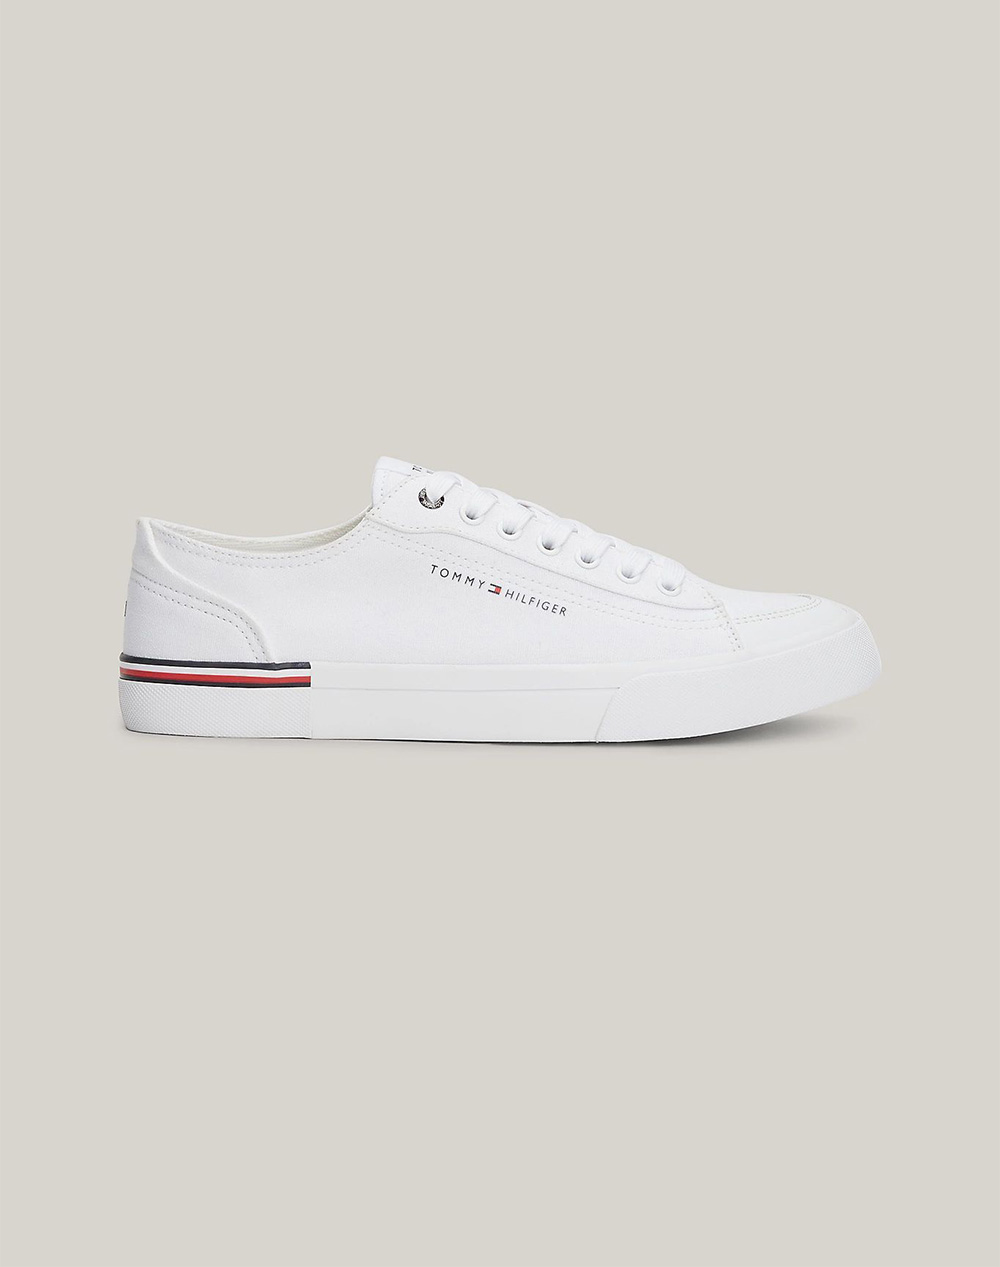 TOMMY HILFIGER CORPORATE VULC CANVAS FM0FM04954-YBS White 3820ATOMM6070218_10778